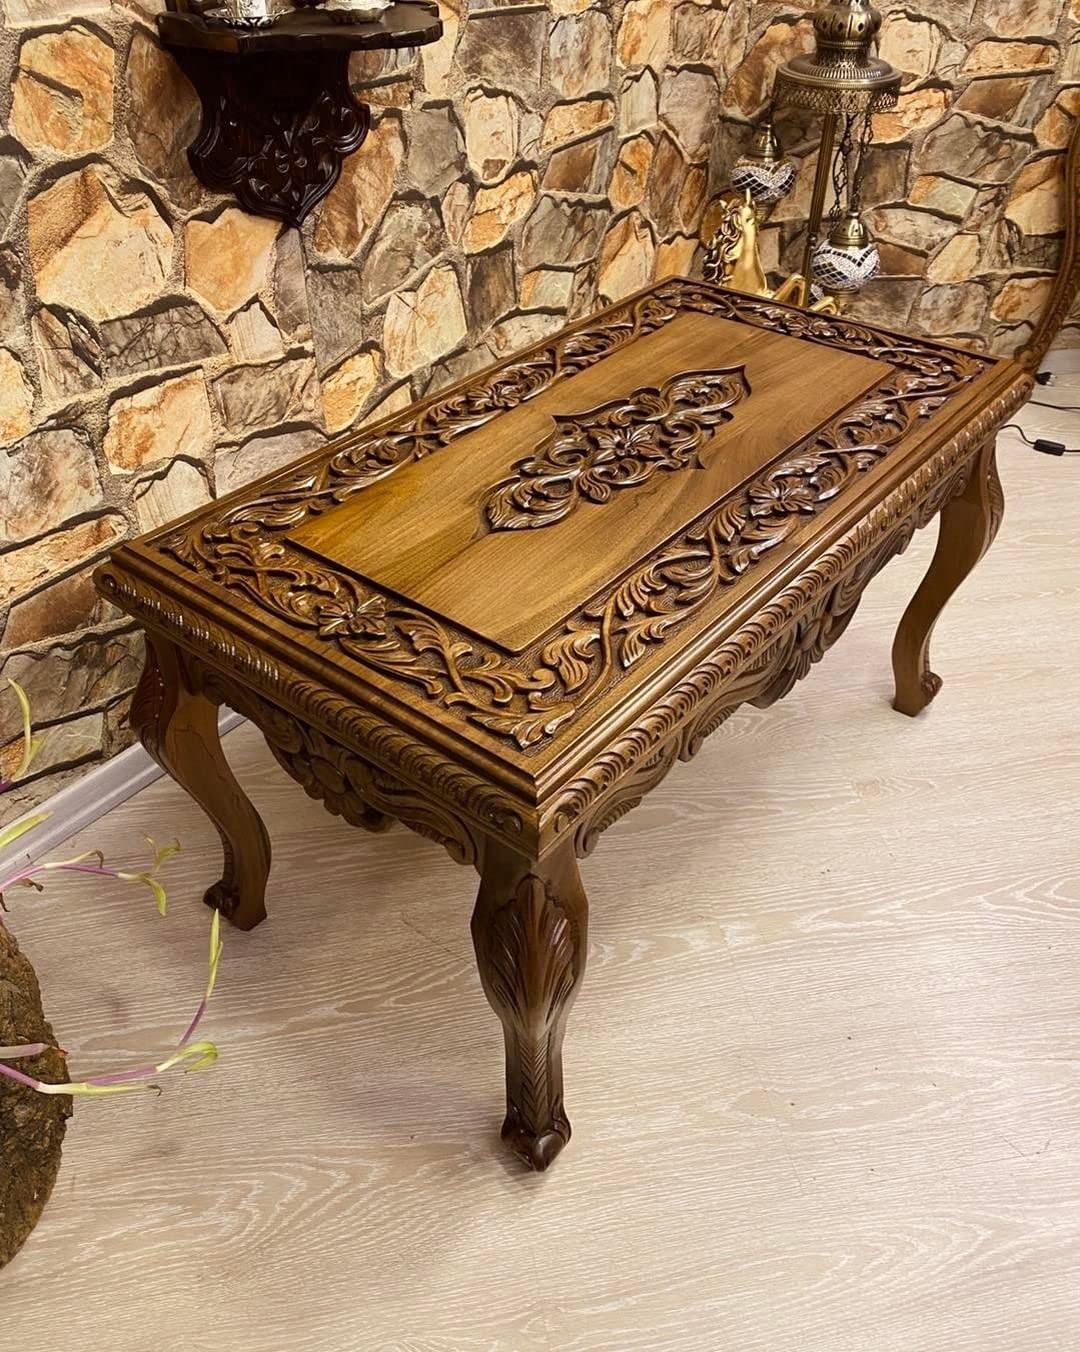 Detailed carving on walnut wood table